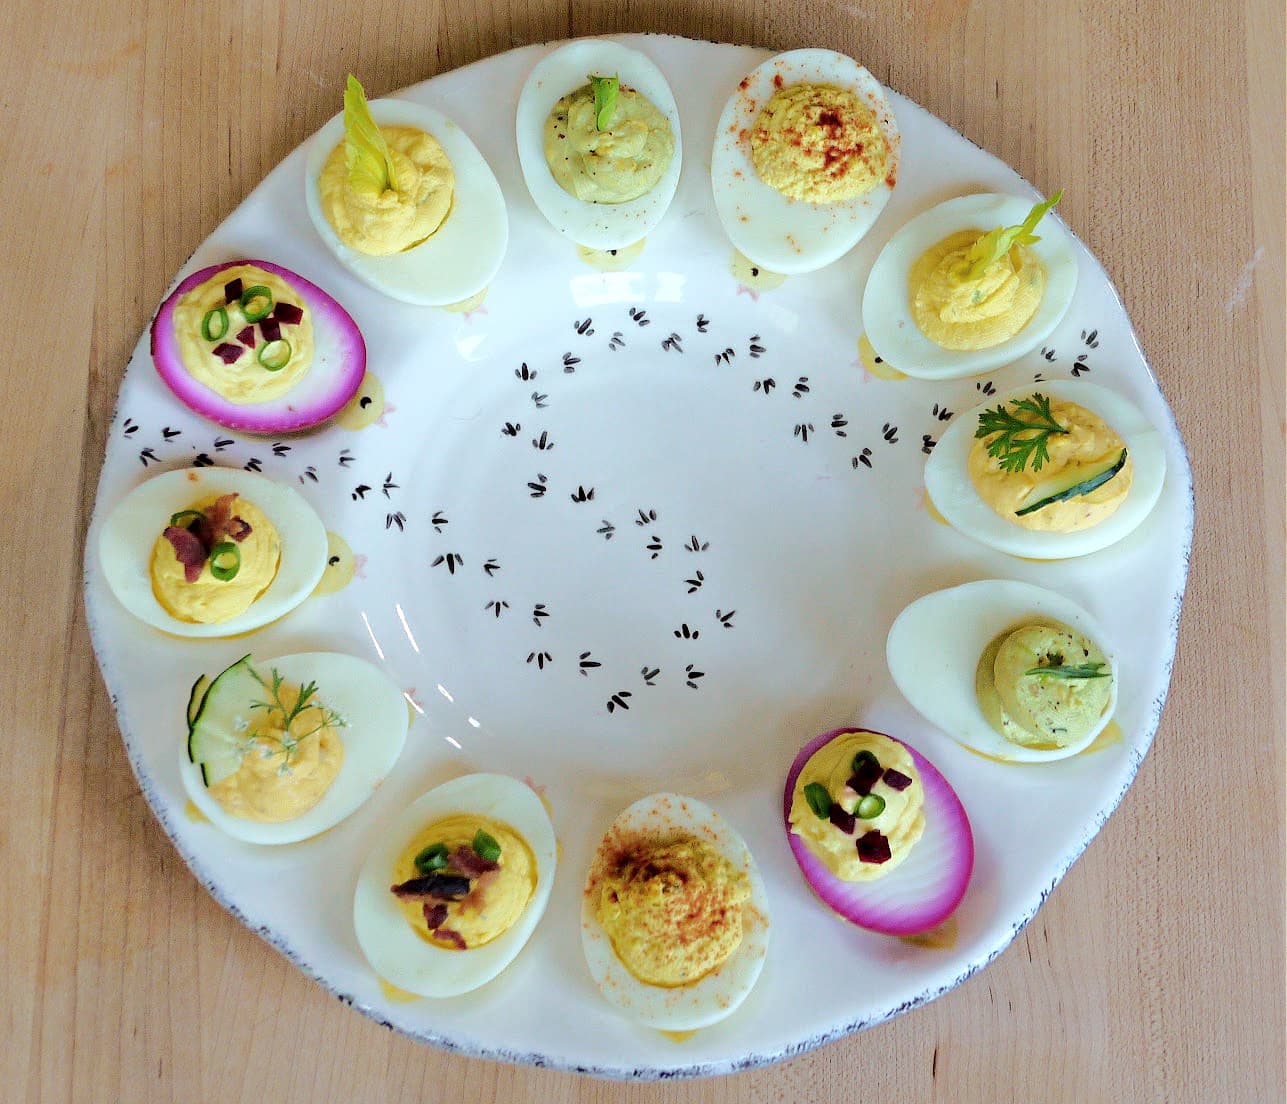 Overhead view of 12 deviled eggs with different types of garnishes, displayed on an egg plate.